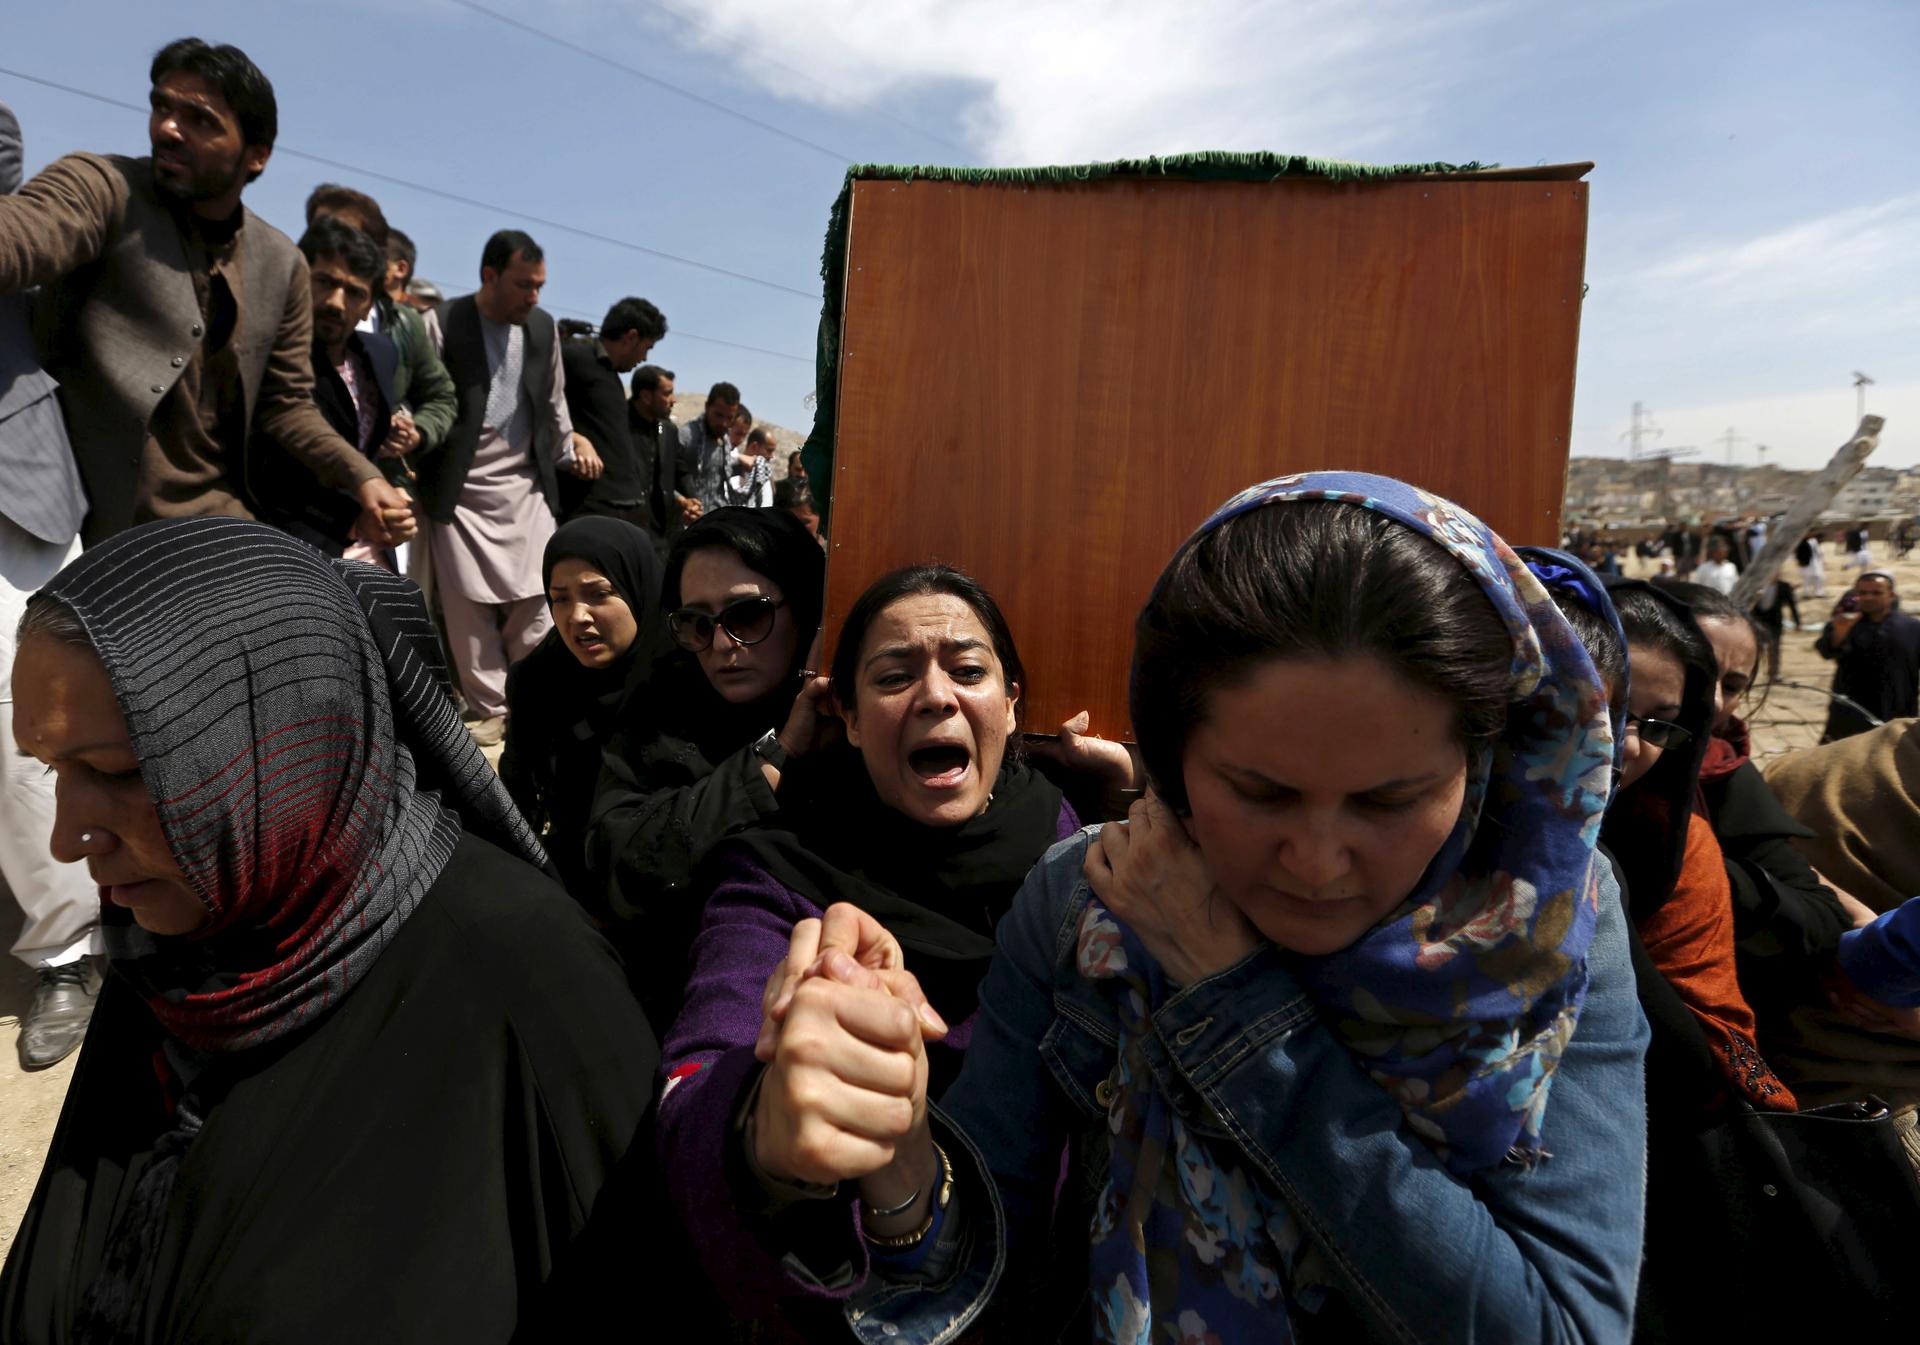 Afghan women's rights activists carry the coffin of Farkhunda, an Afghan woman who was beaten to death and set alight on fire on Thursday, during her burial ceremony in Kabul March 22, 2015